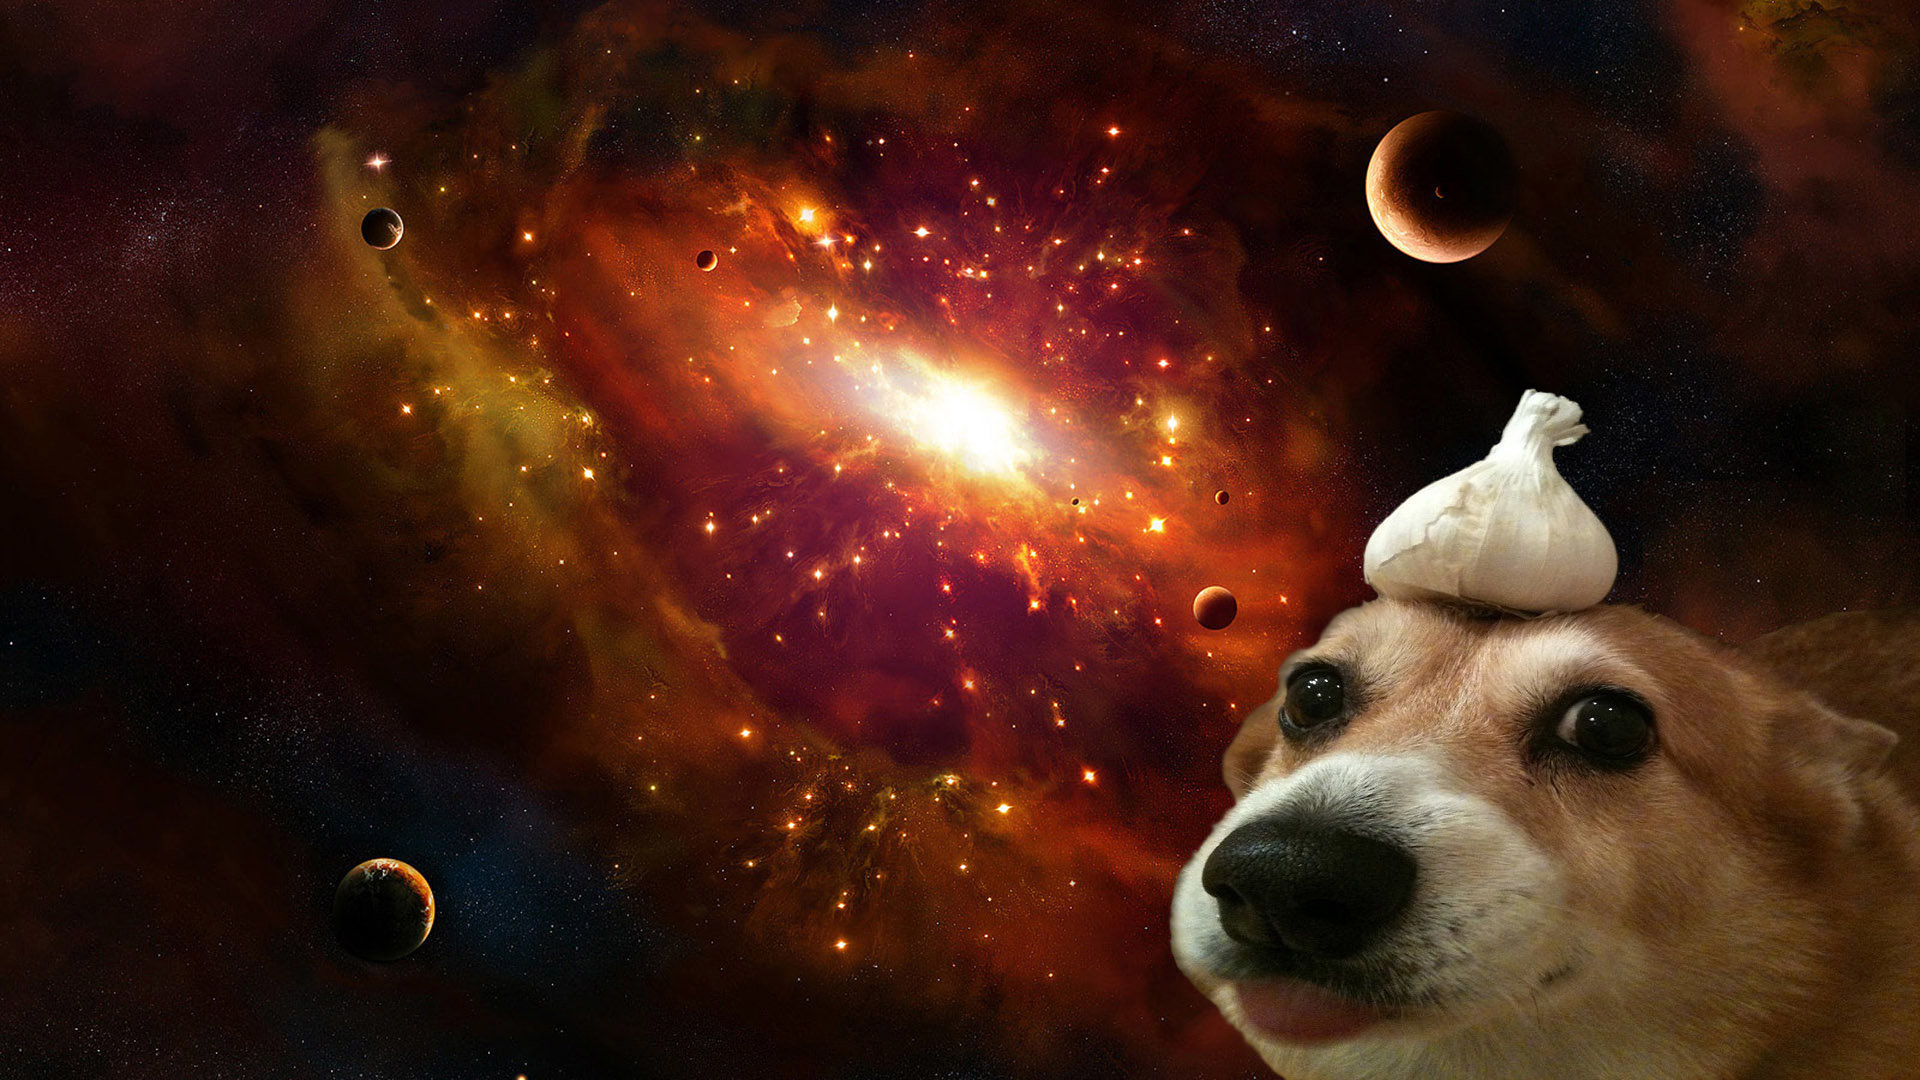 dank wallpaper,canidae,dog,outer space,space,astronomical object